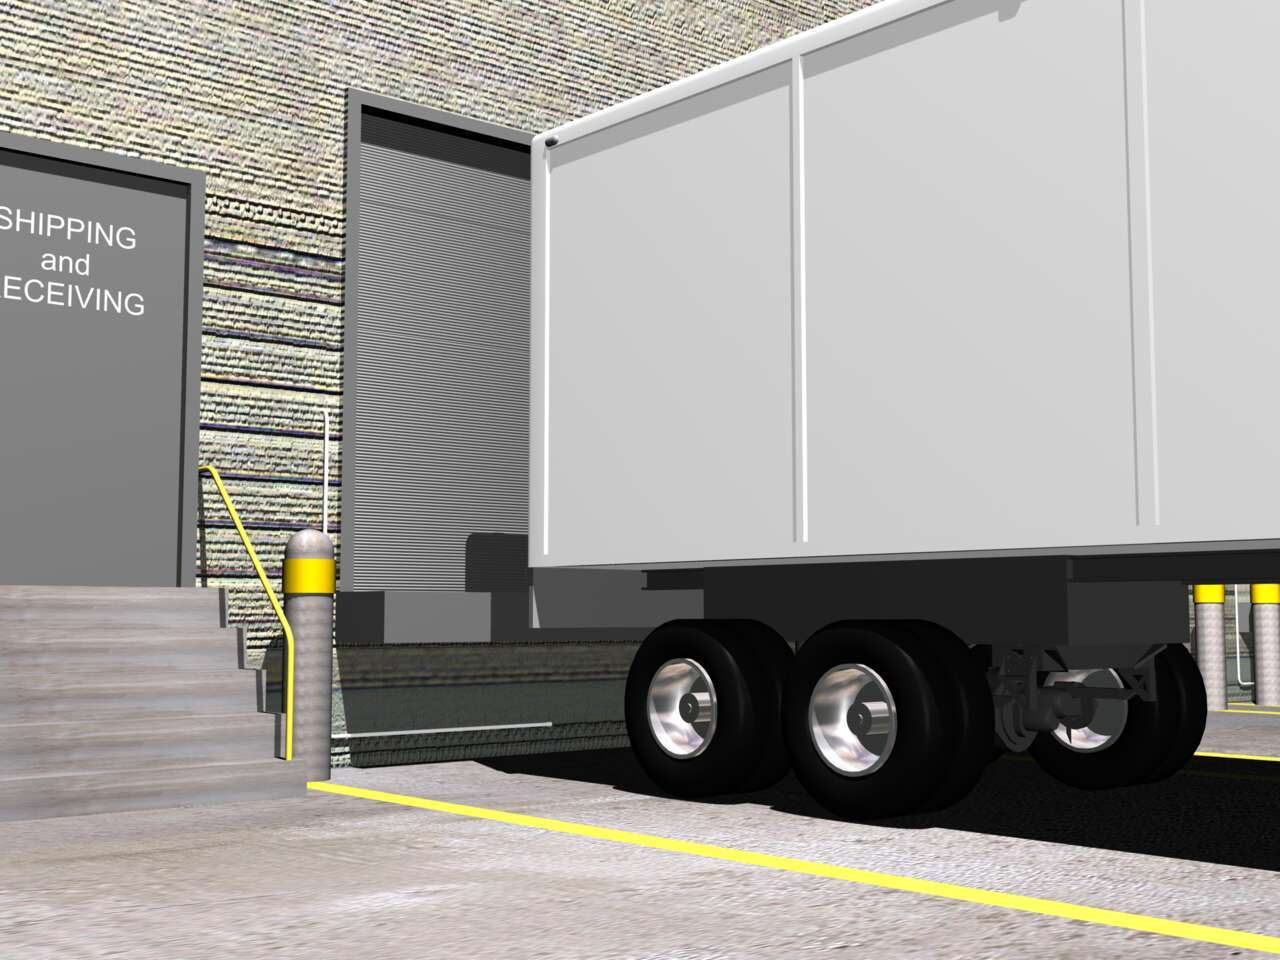 Delivery Truck Detection at an Outdoor Loading Dock